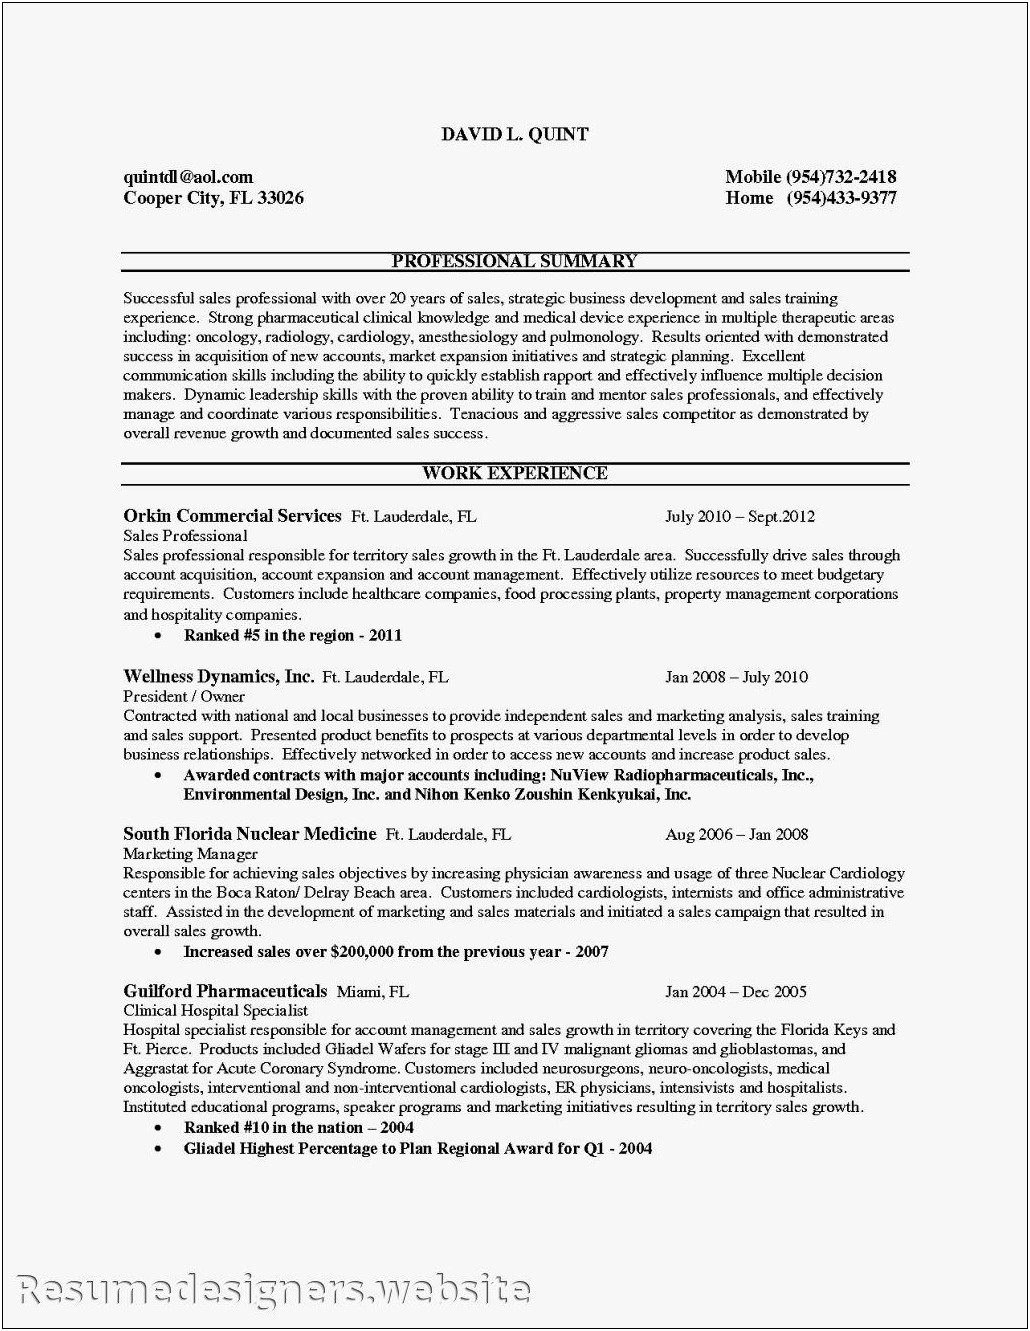 Resume Objective Statement For Entry Level Sales